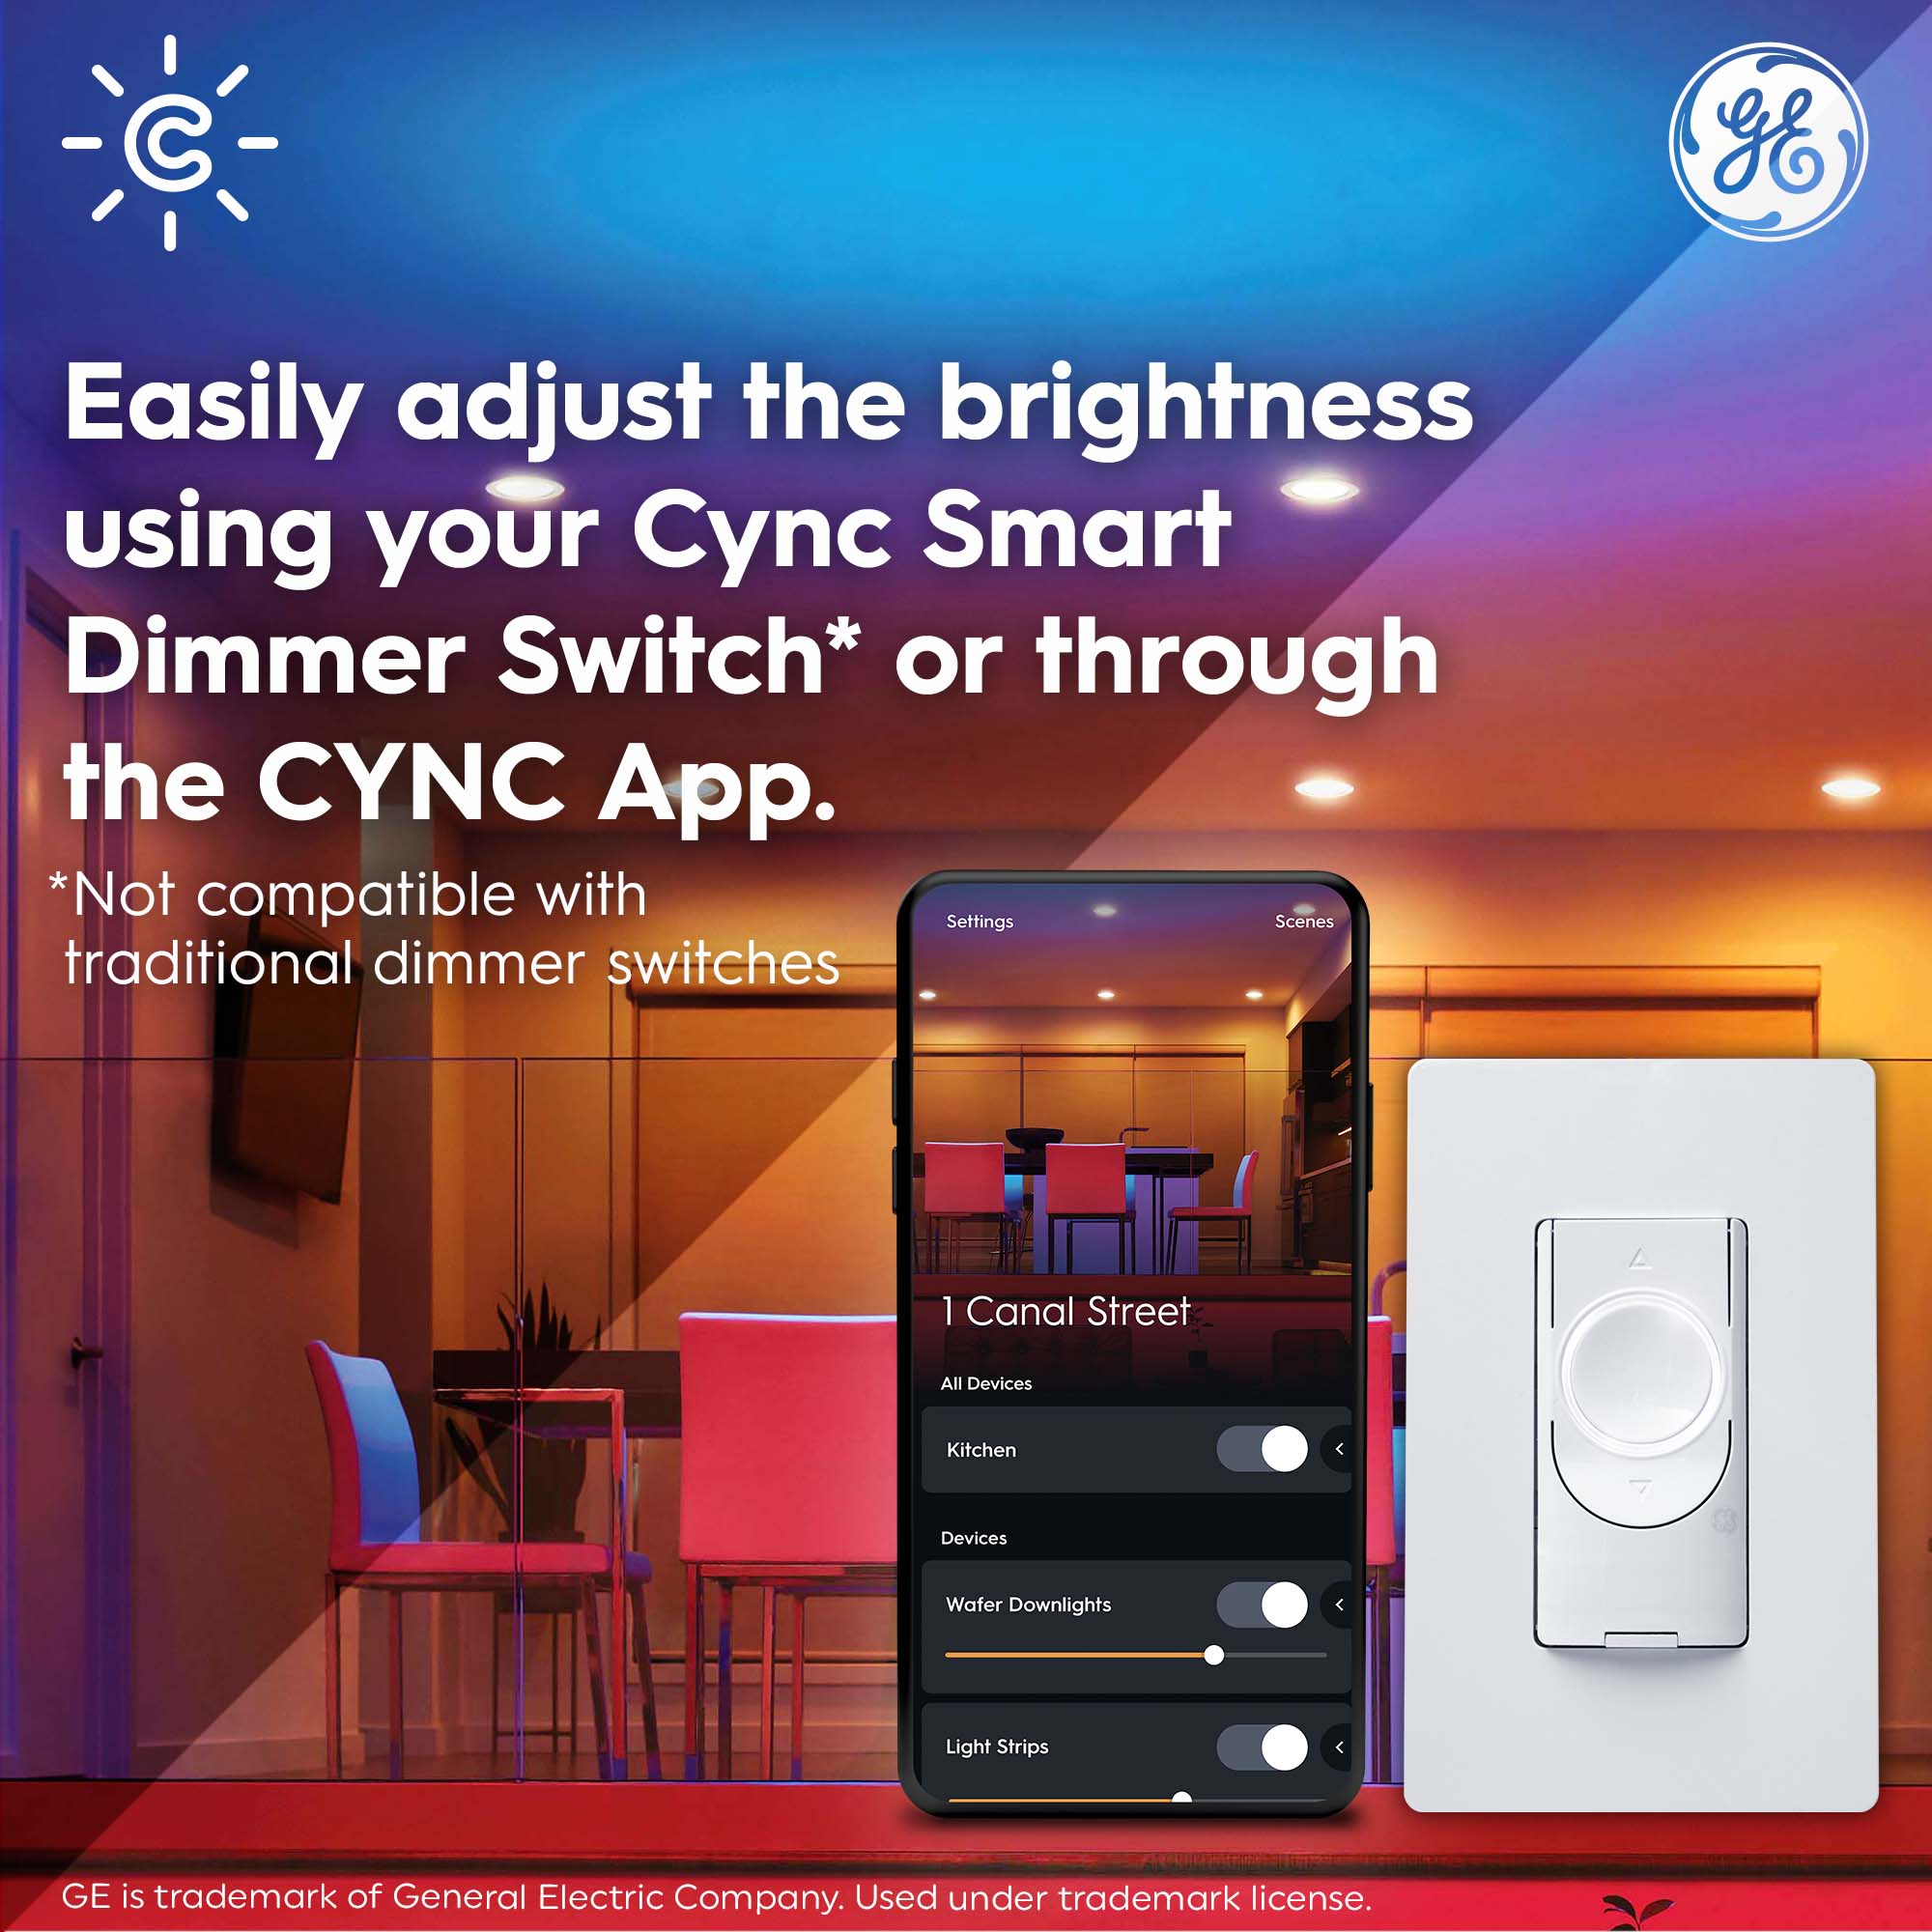 GE CYNC Smart Remote, Dimmer Remote + White Tones Control, Bluetooth  Enabled, Battery Powered (1 Pack)